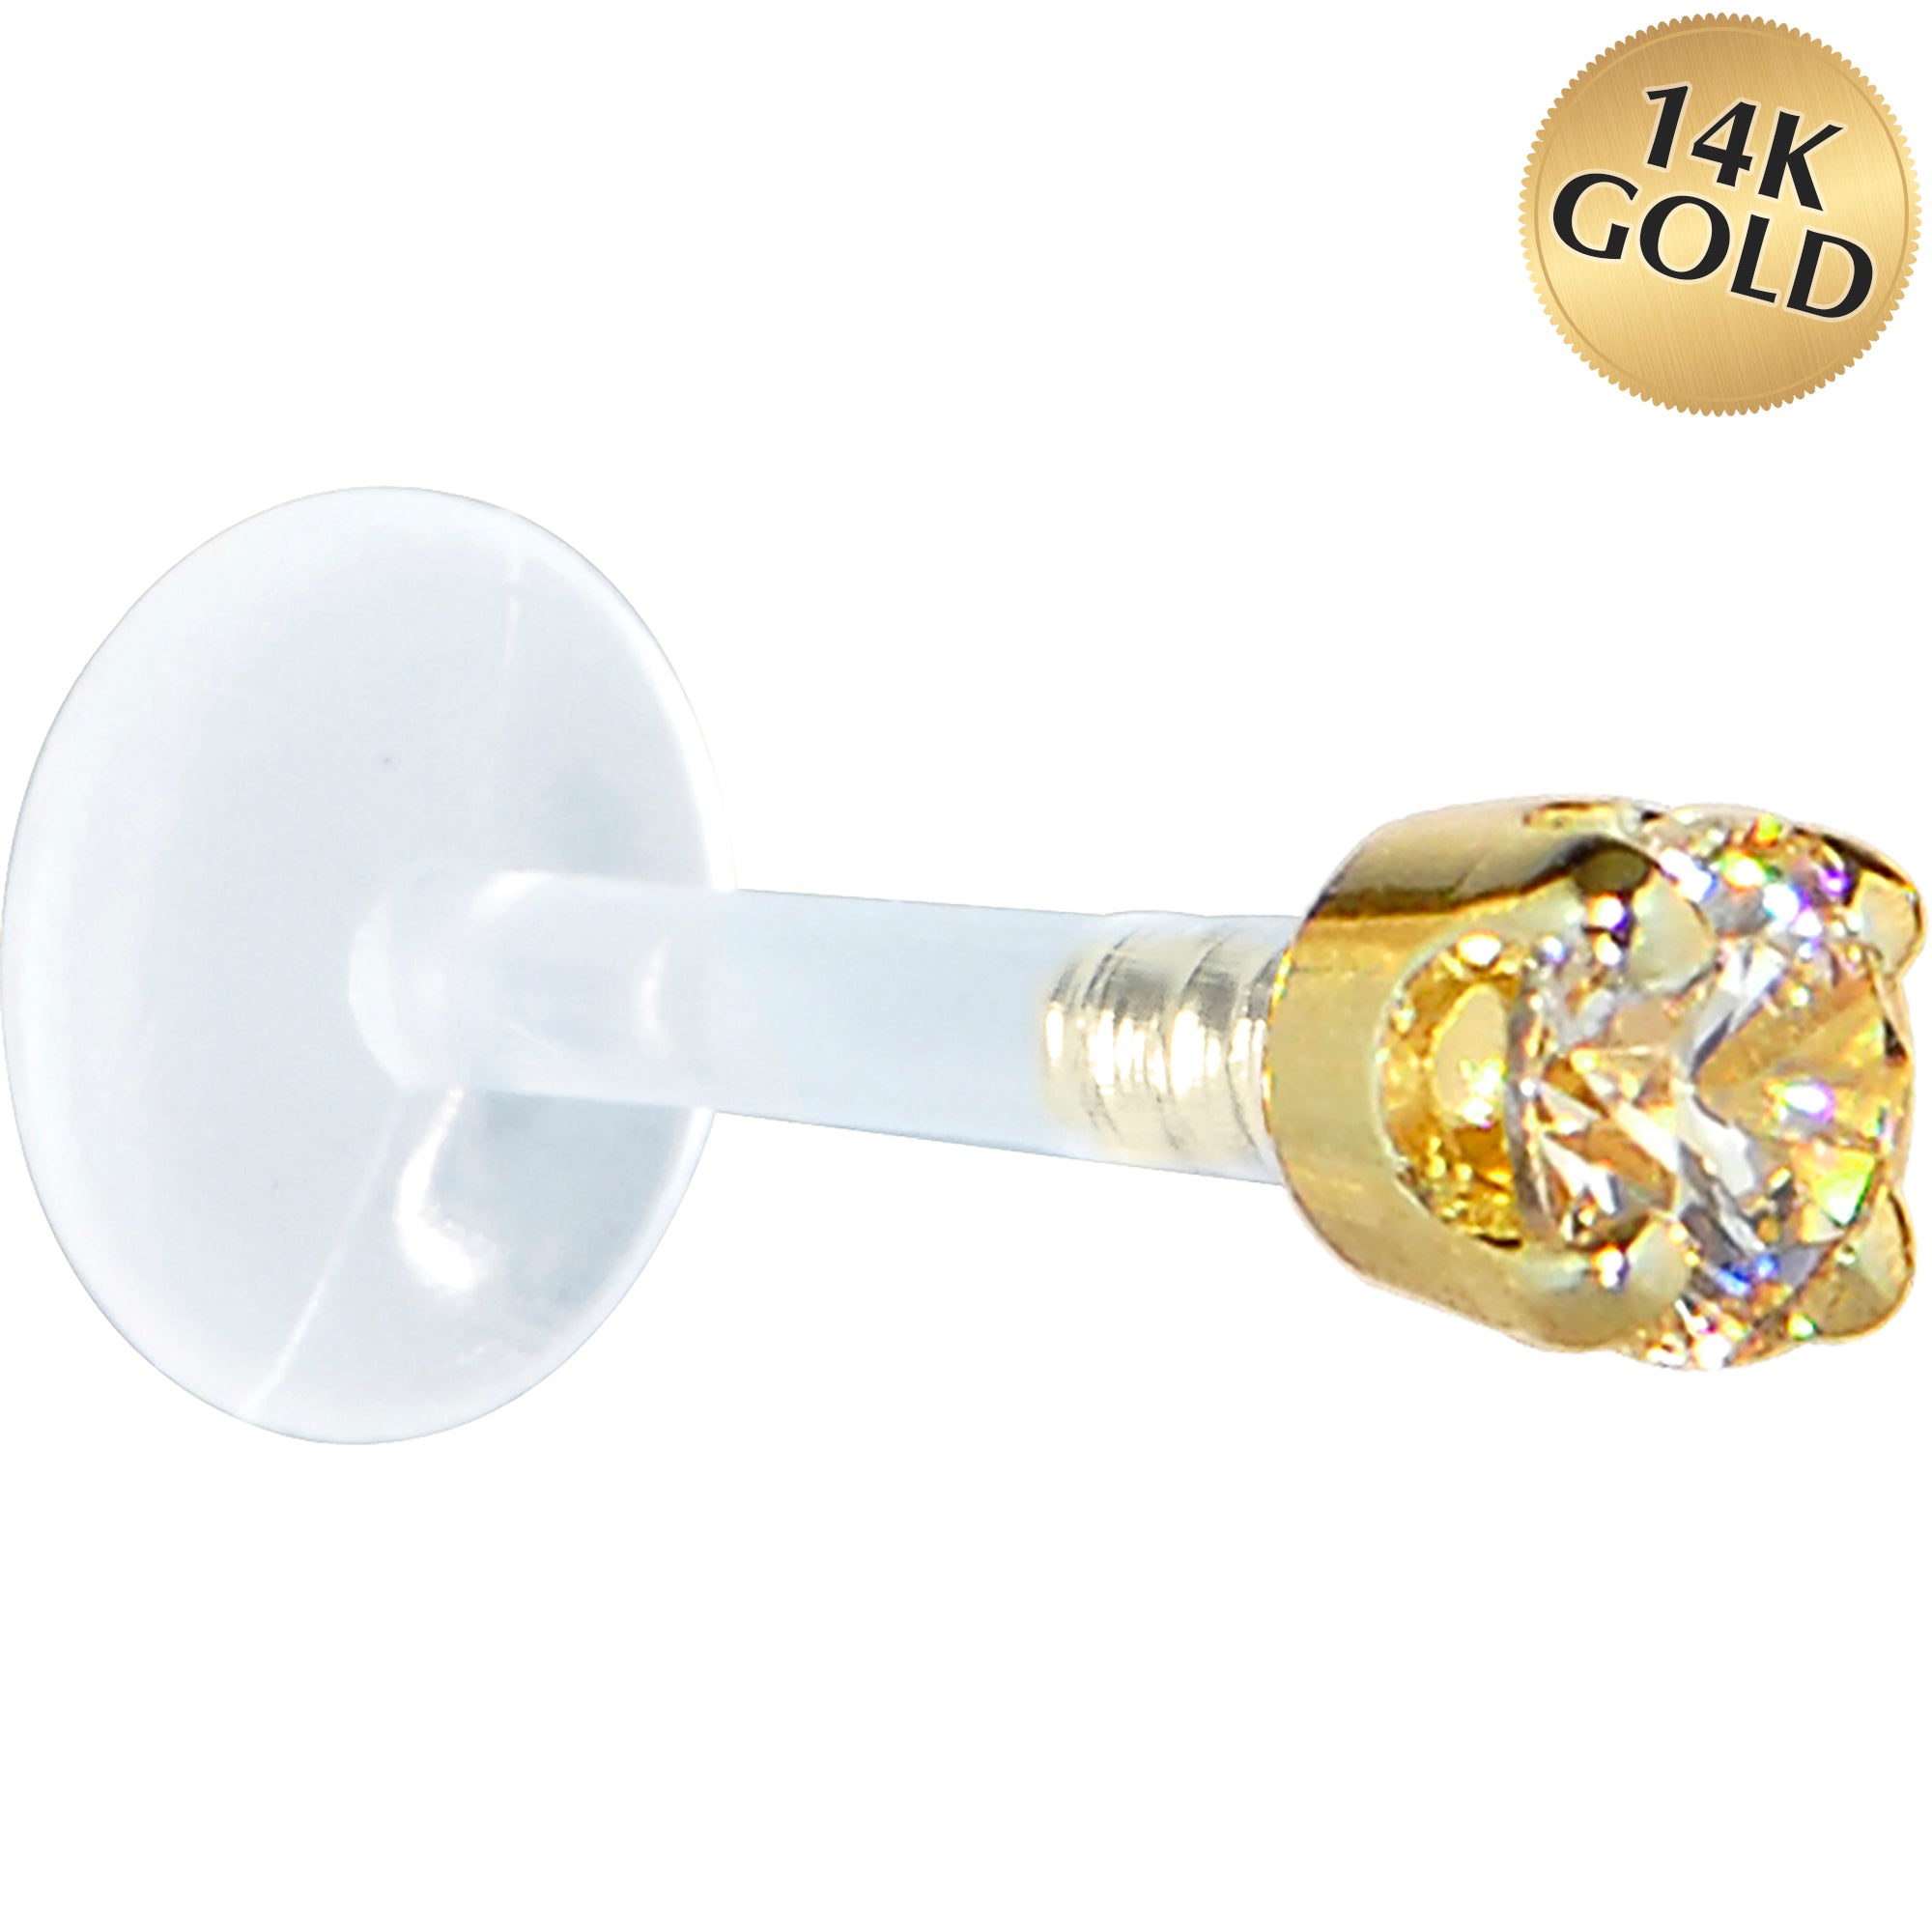 16 Gauge 5/16 Solid 14KT Yellow Gold 3mm Champagne Cubic Zirconia Bioplast Tragus Earring Stud